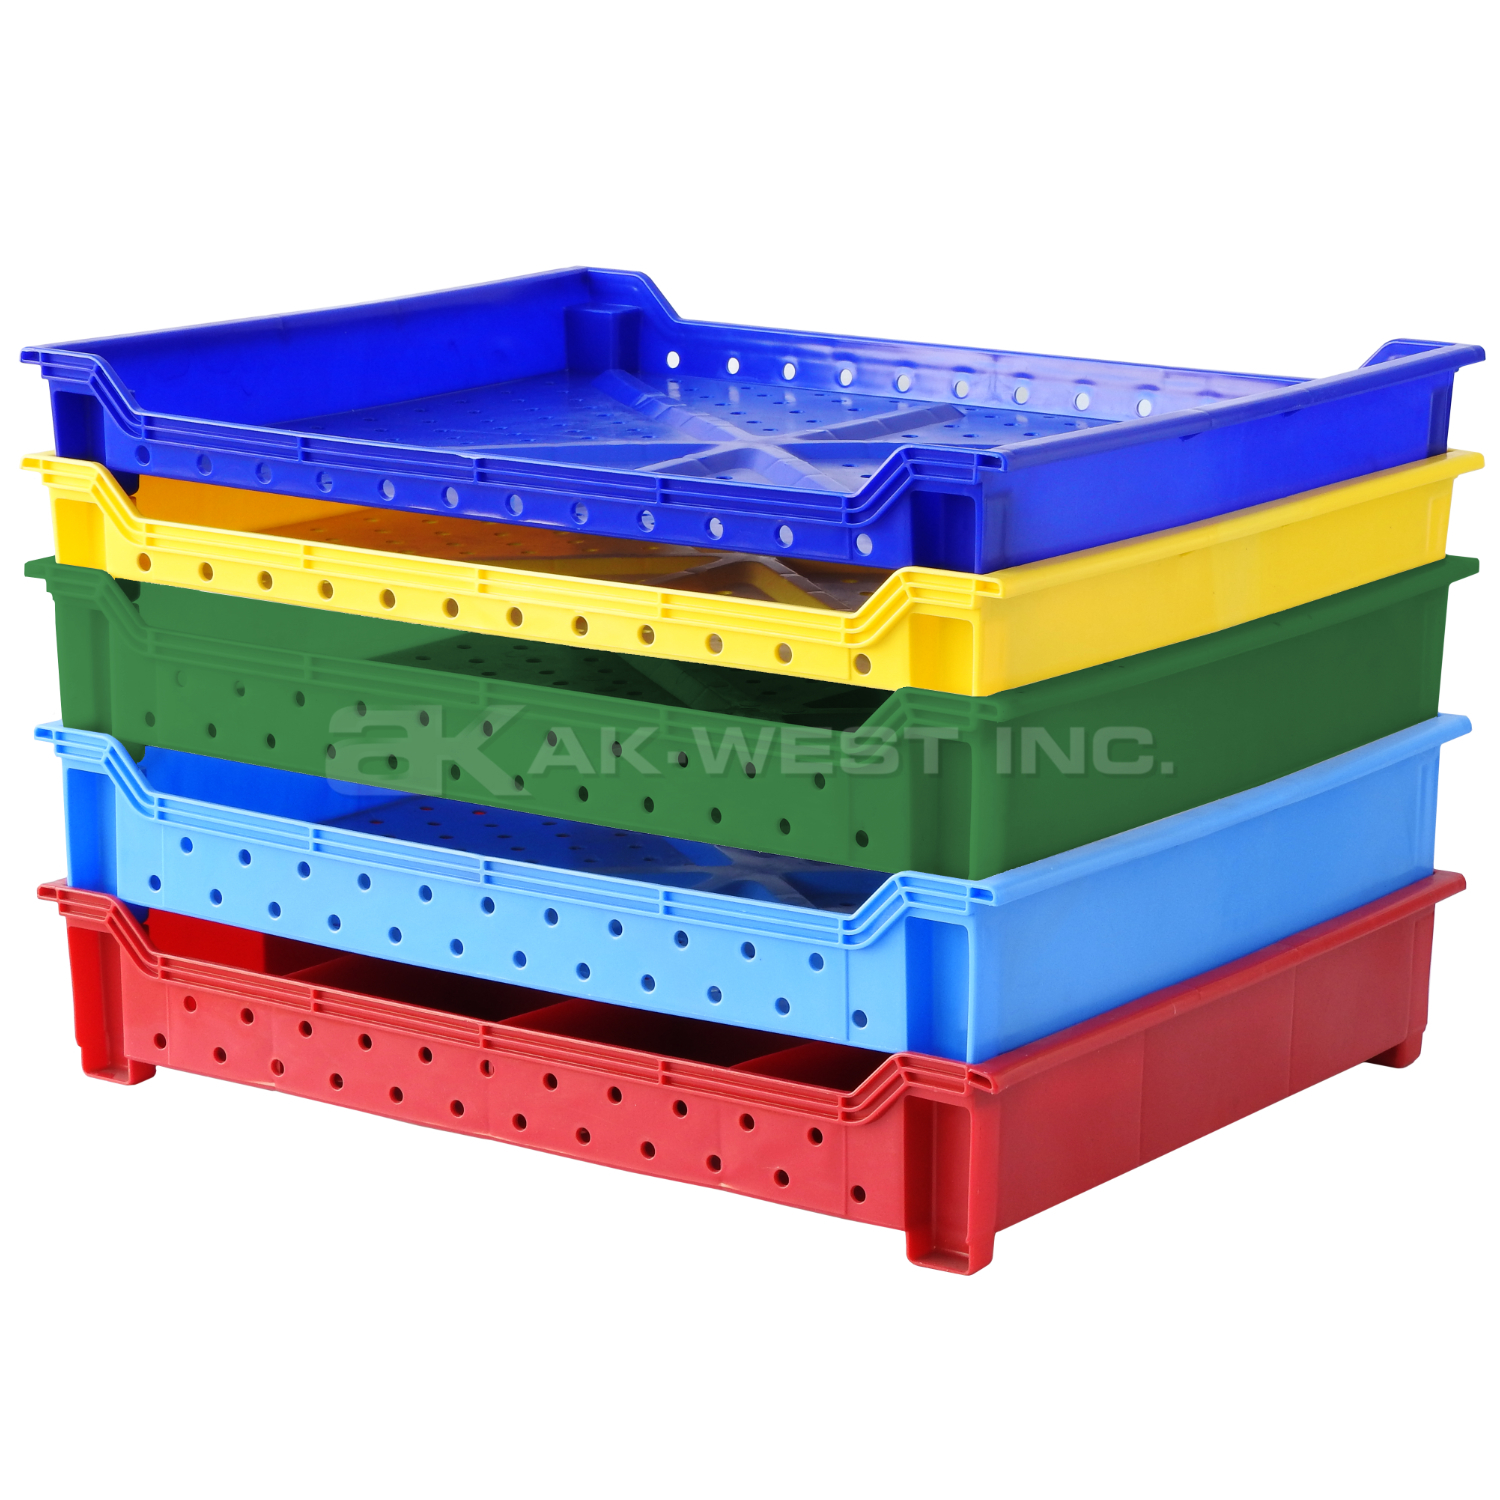 Yellow, 24"L x 18"W x 3"H Stackable Tray w/ Vented Sides and Base